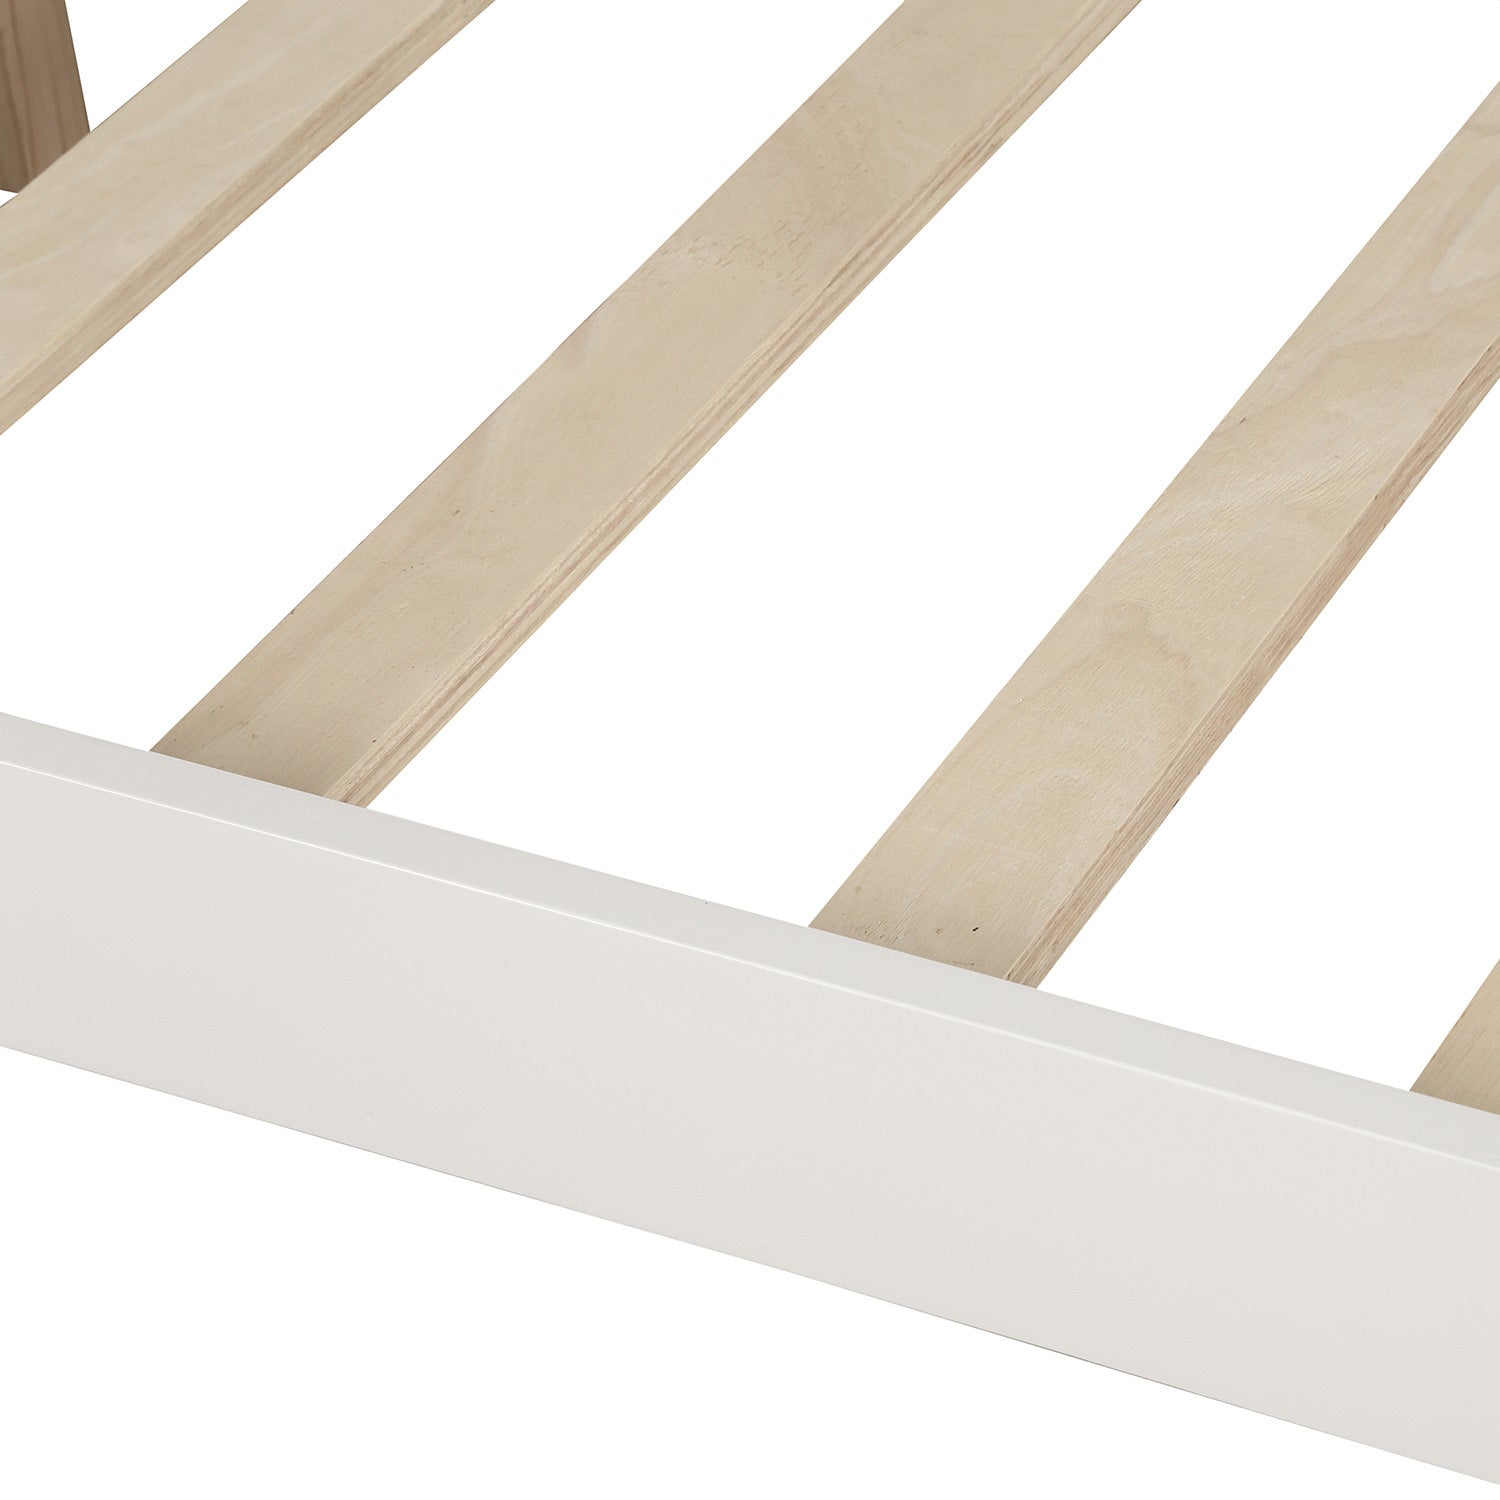 Wood Daybed with Support Legs-White